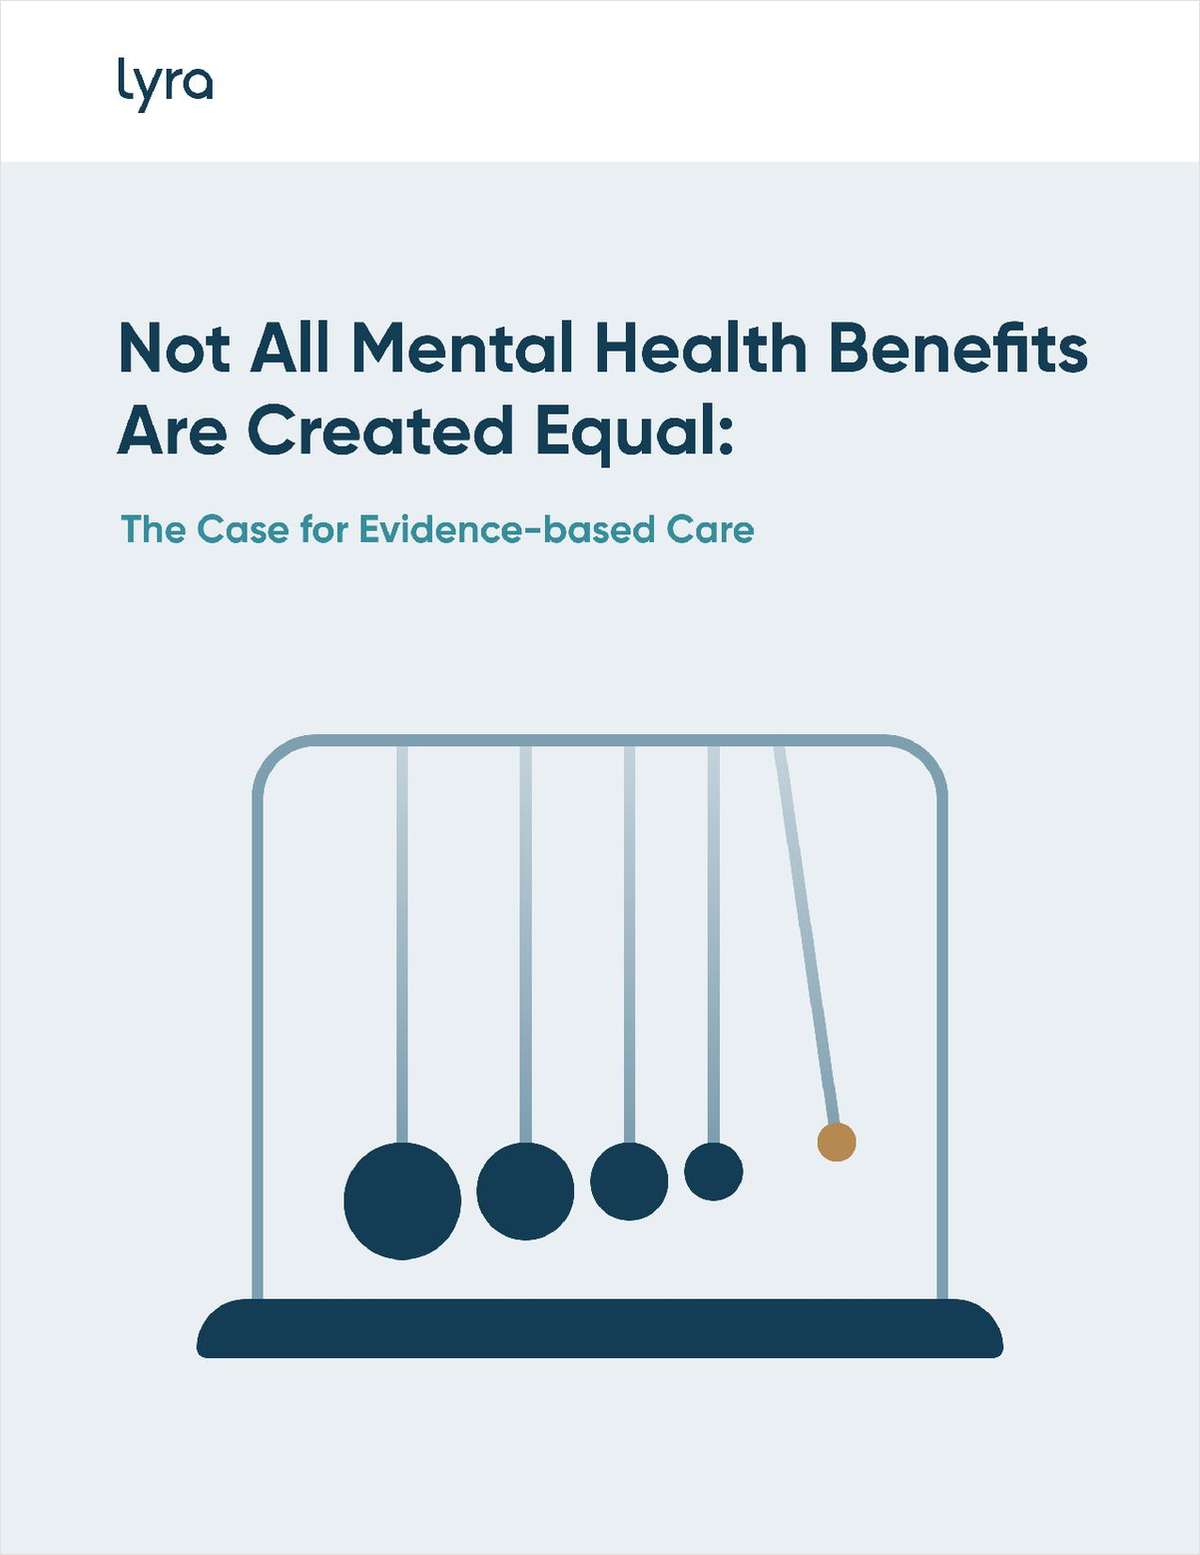 Not All Mental Health Benefits Are Created Equal: The Case for Evidence-Based Care